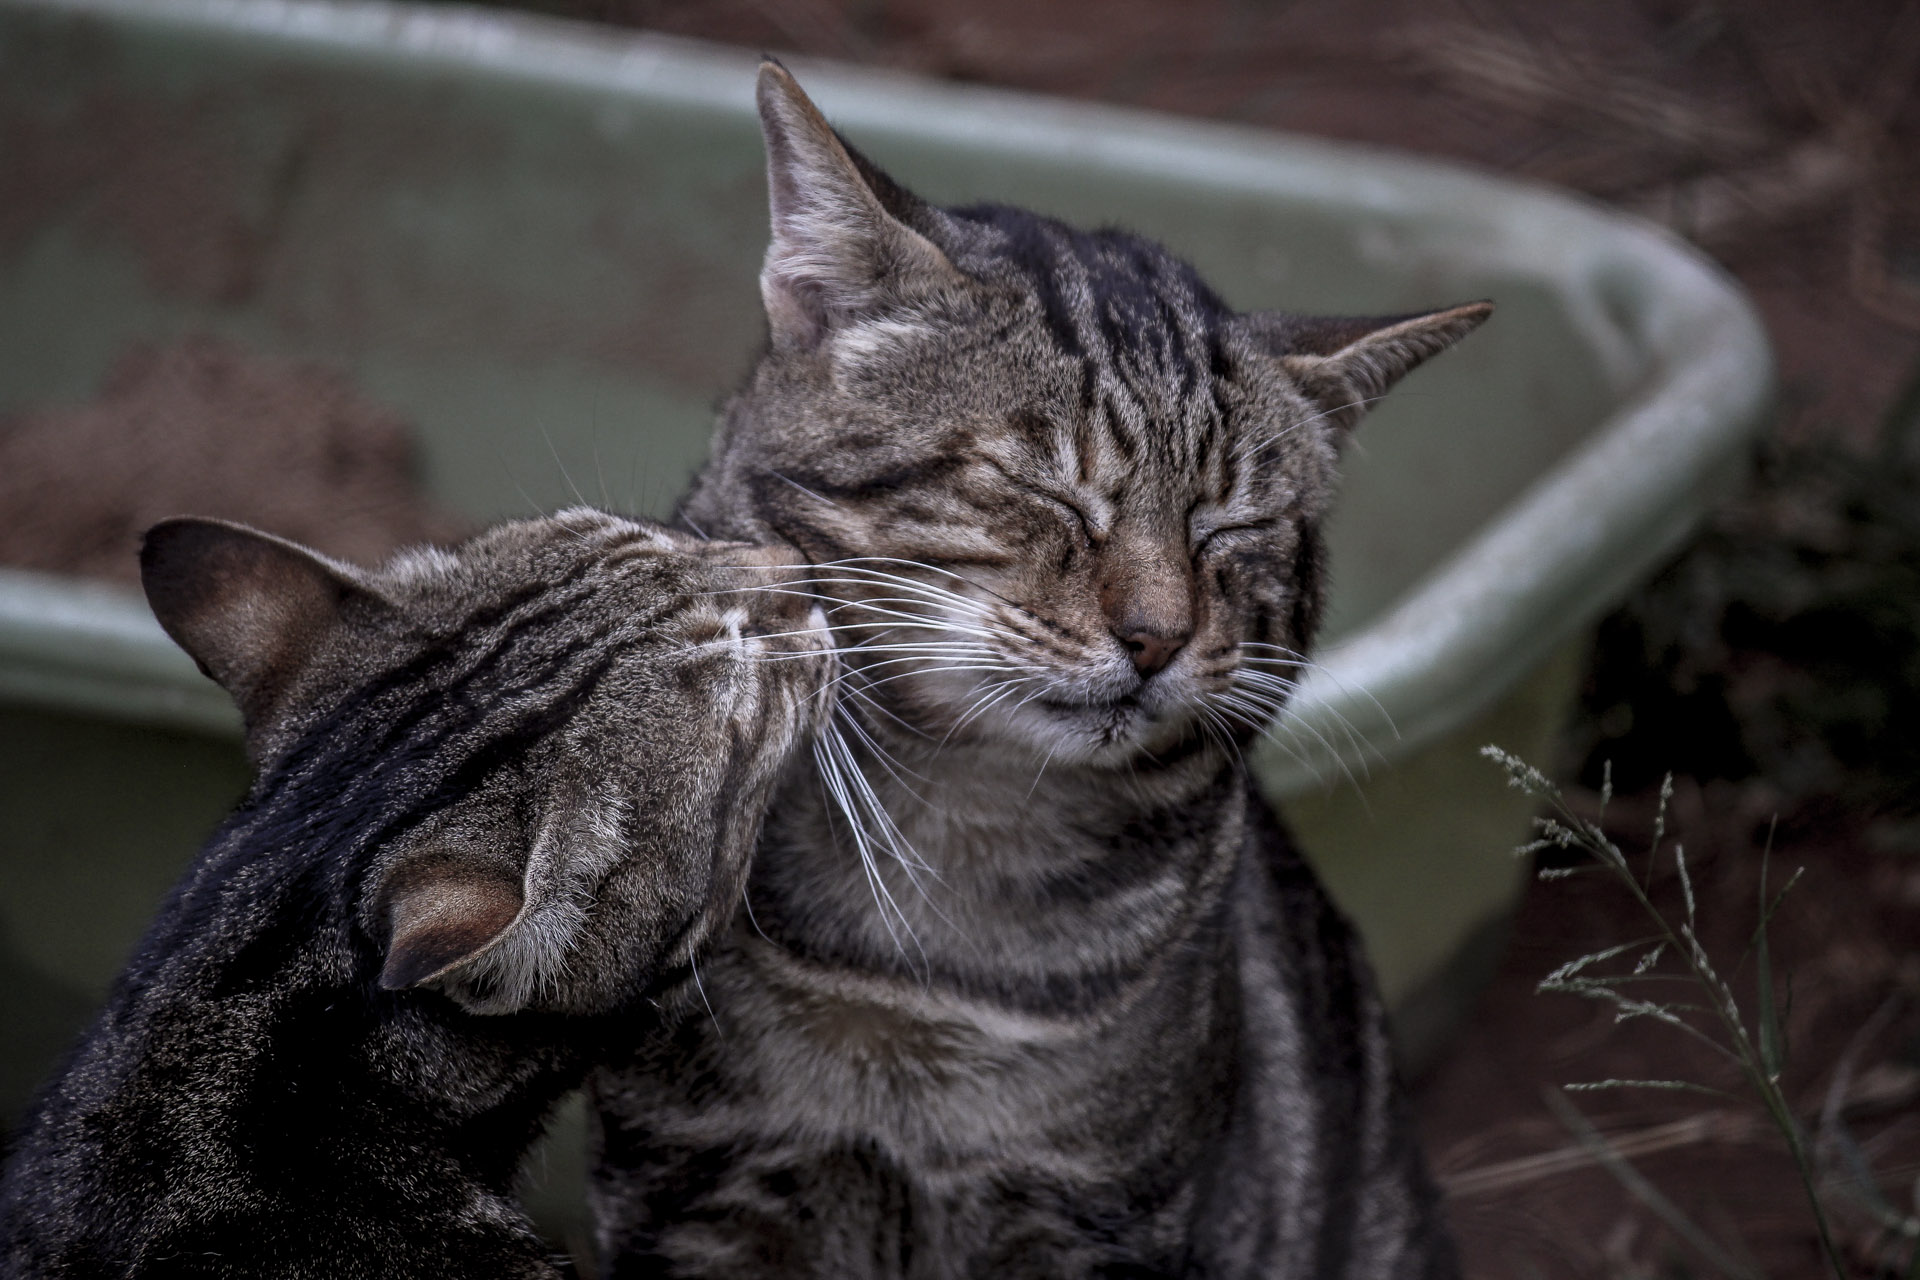 Previous pigeonhole => Big and Small Cats // Petr Nuska - Photography - woreshack.cz